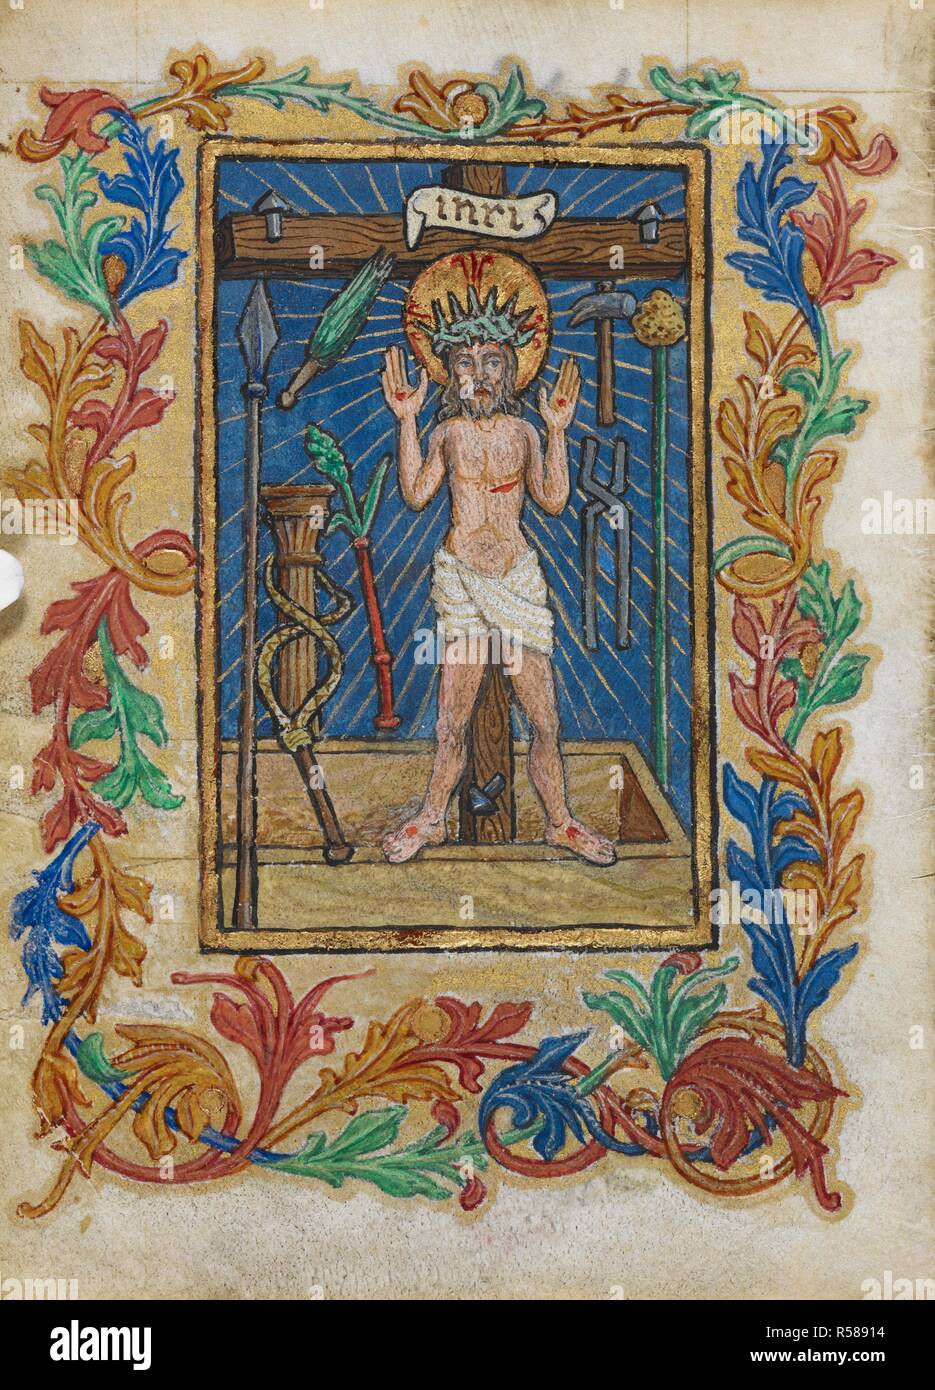 [Whole folio] Christ standing in front of the cross showing his wounds, with instruments of the passion. Produced for Alexander, son of Casimir IV, King of Poland. Prayer book of King Alexander. [Poland?]; 1491.    . Source: Add. 38603, f.15v. Language: Latin. Author: Zlotcowski, Johannes, scribe. Stock Photo